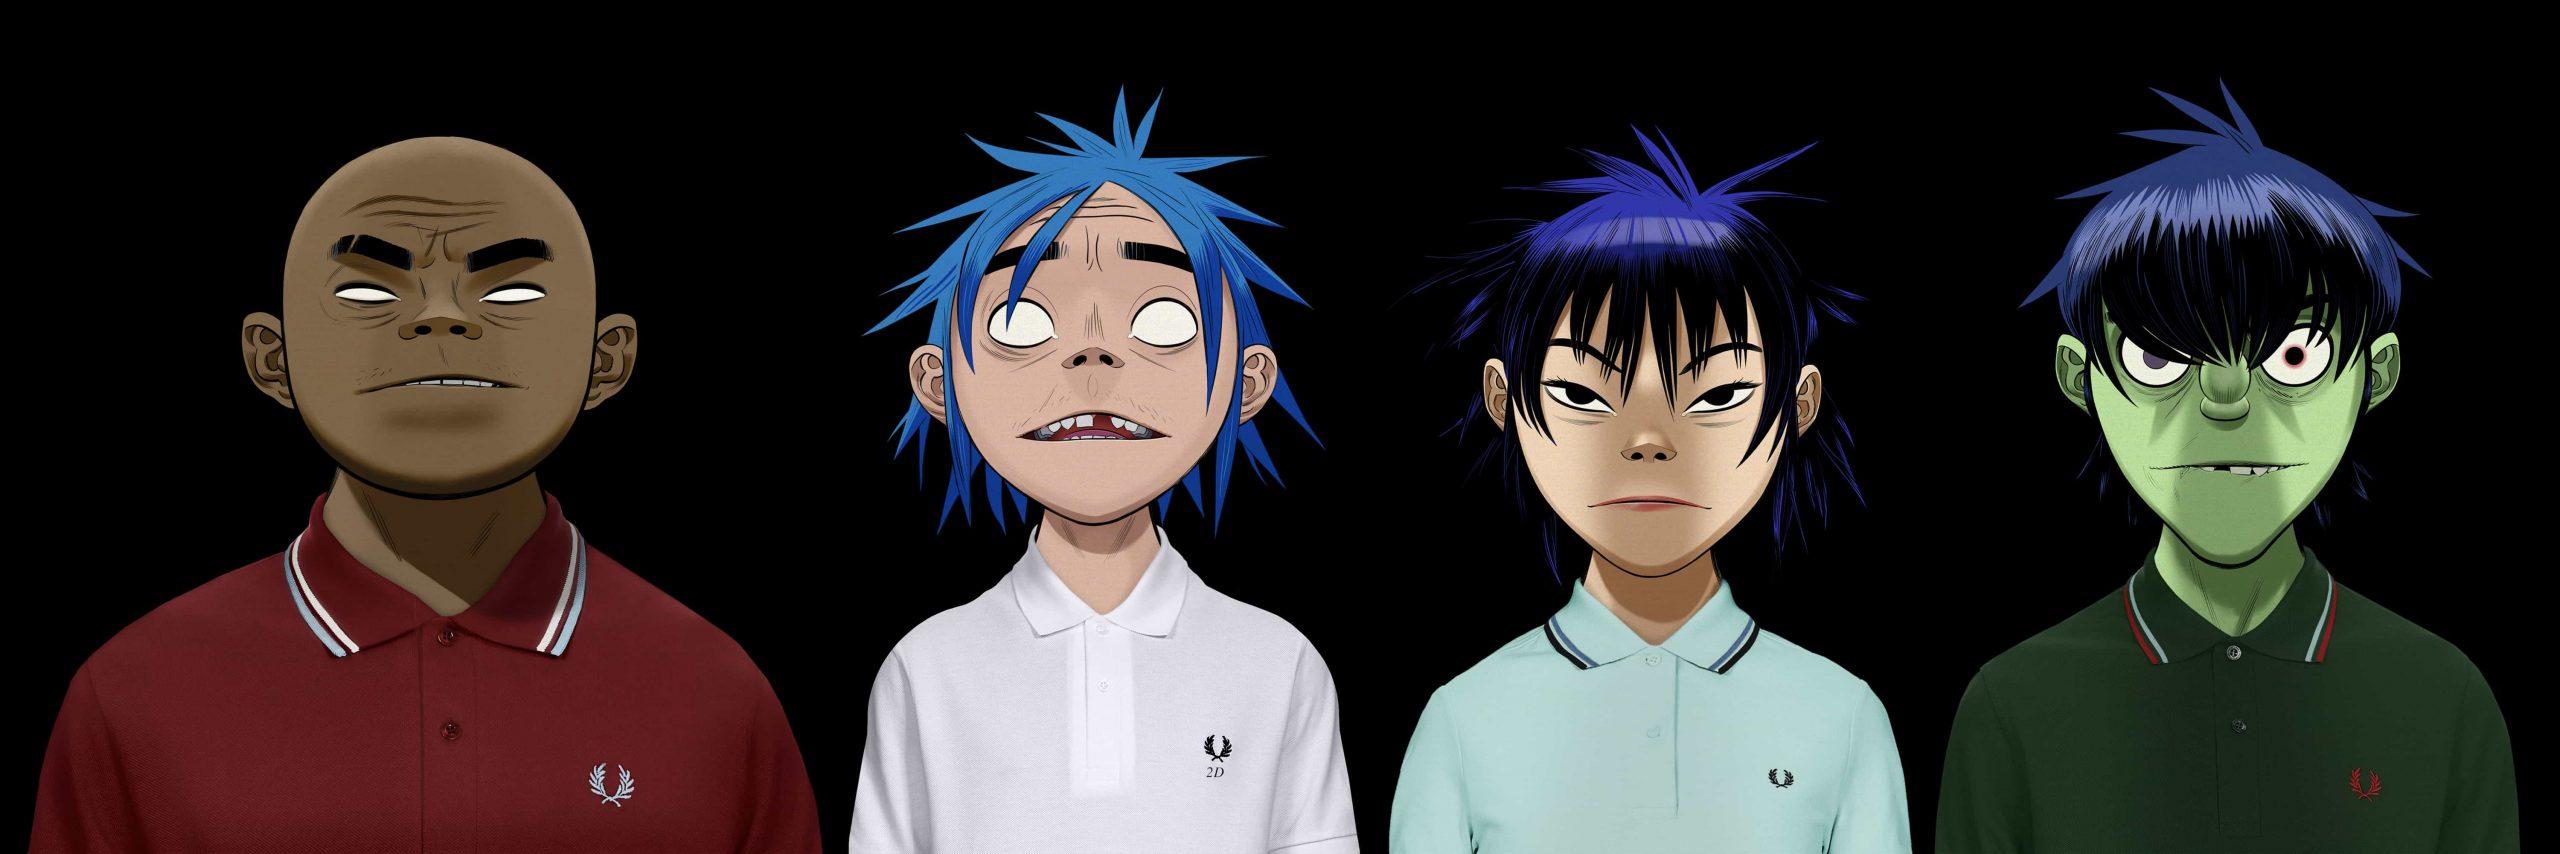 Fred Perry collaborates with British band Gorillaz to create the Fred Perry shirt 2021